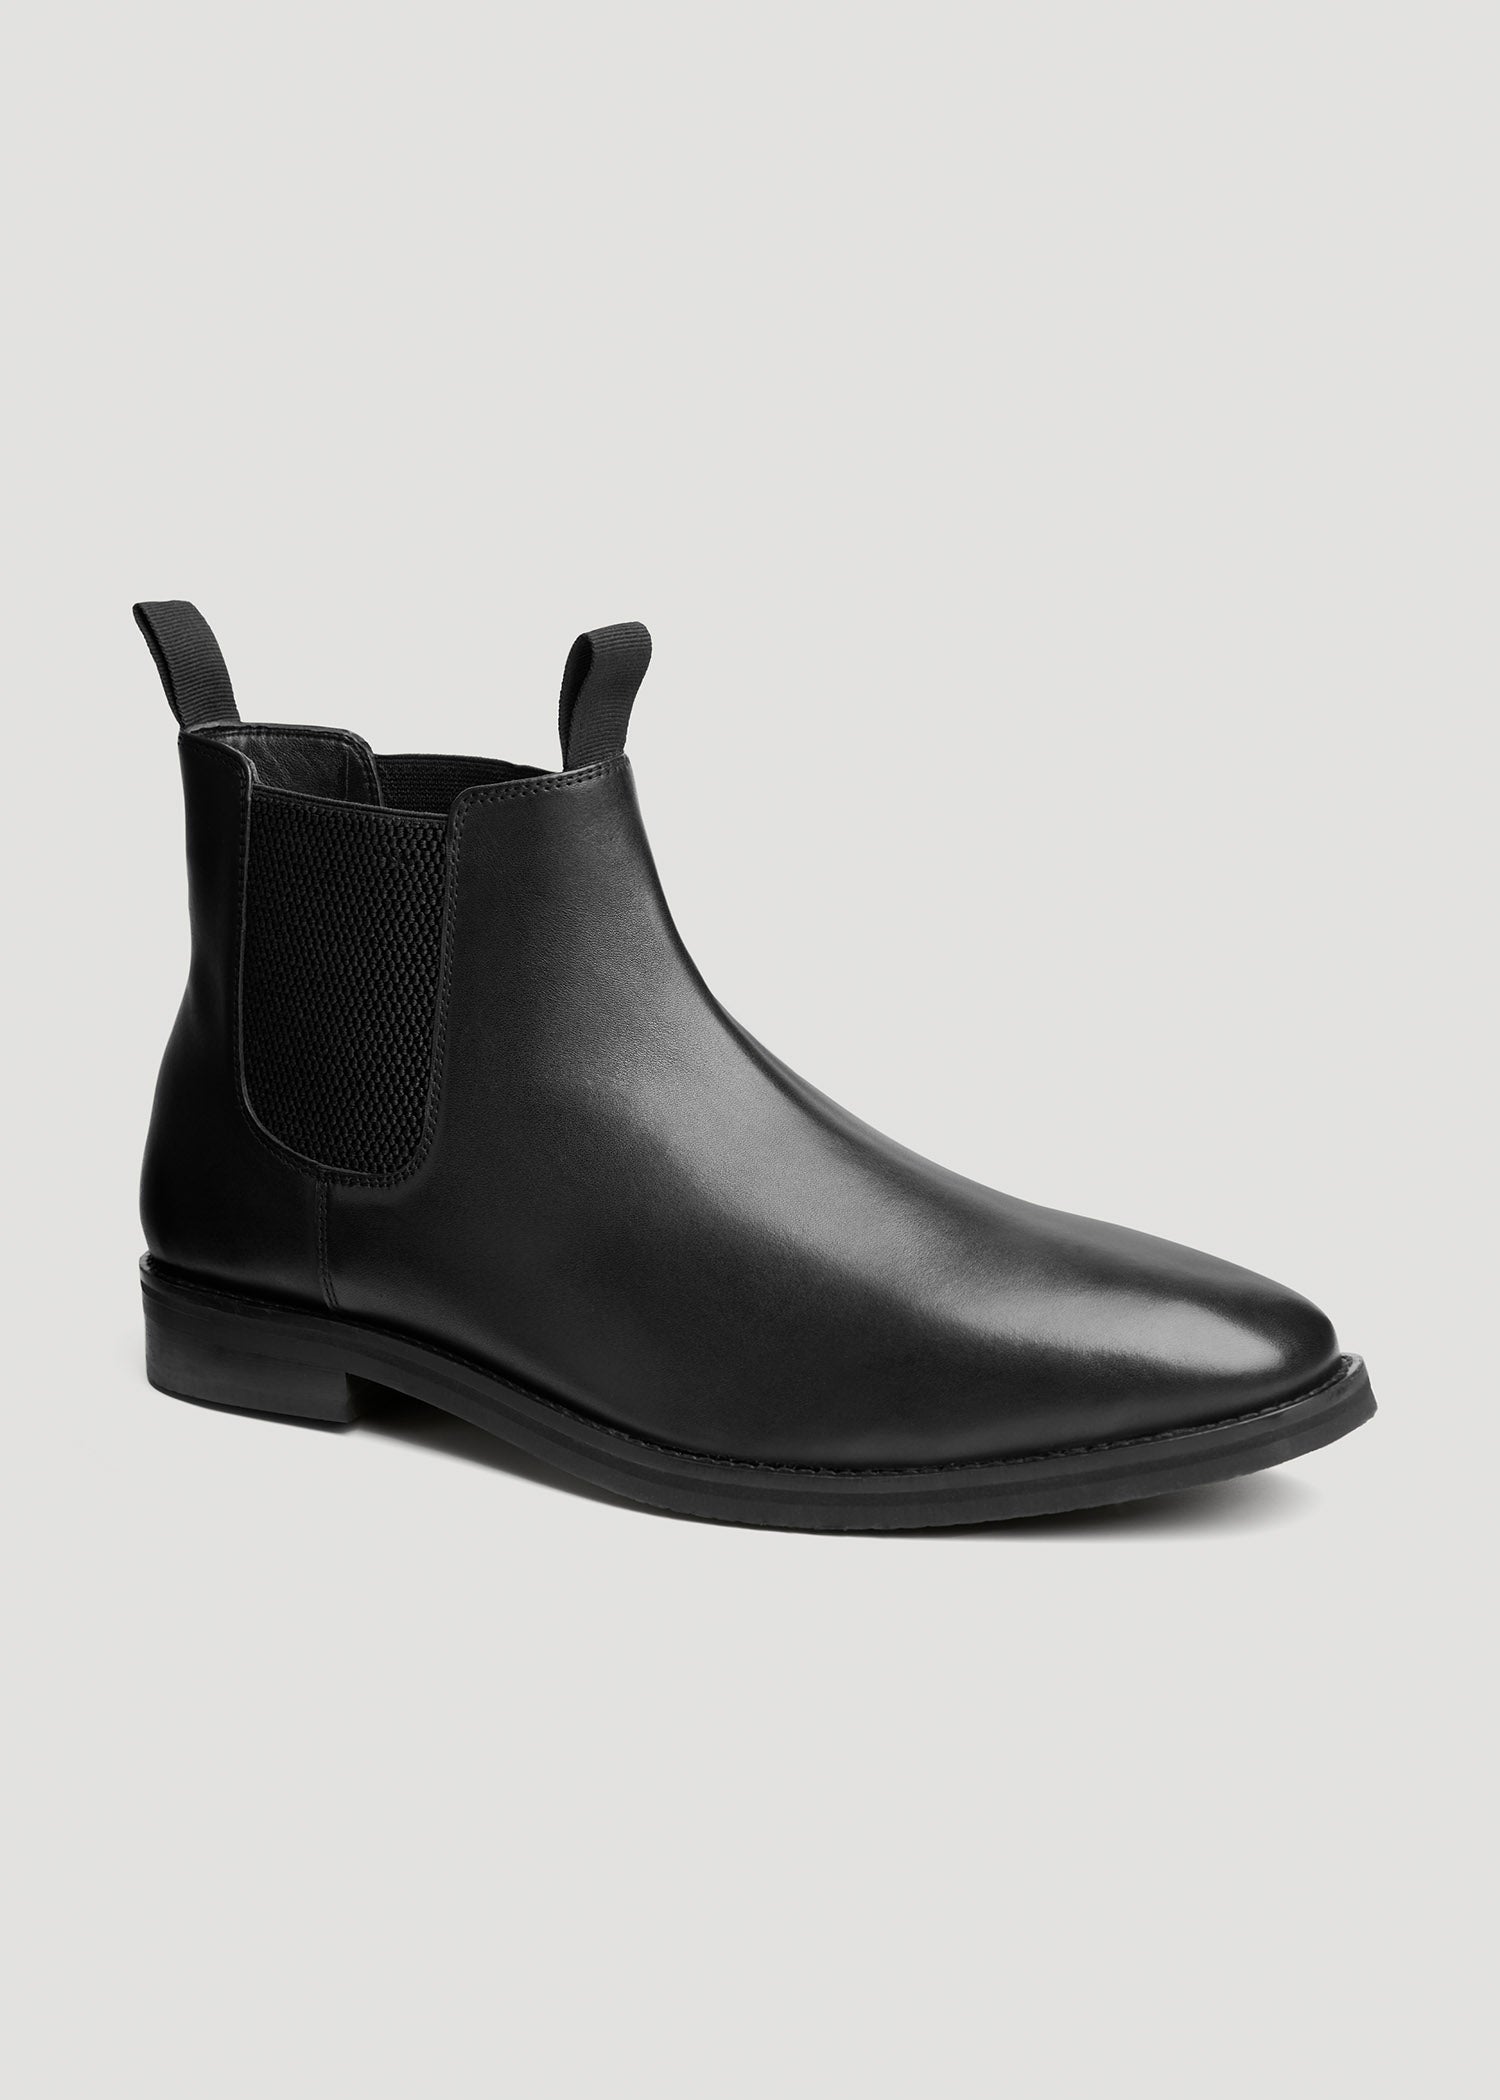 Men's Chelsea Boots Size 13 to 15 | American Tall